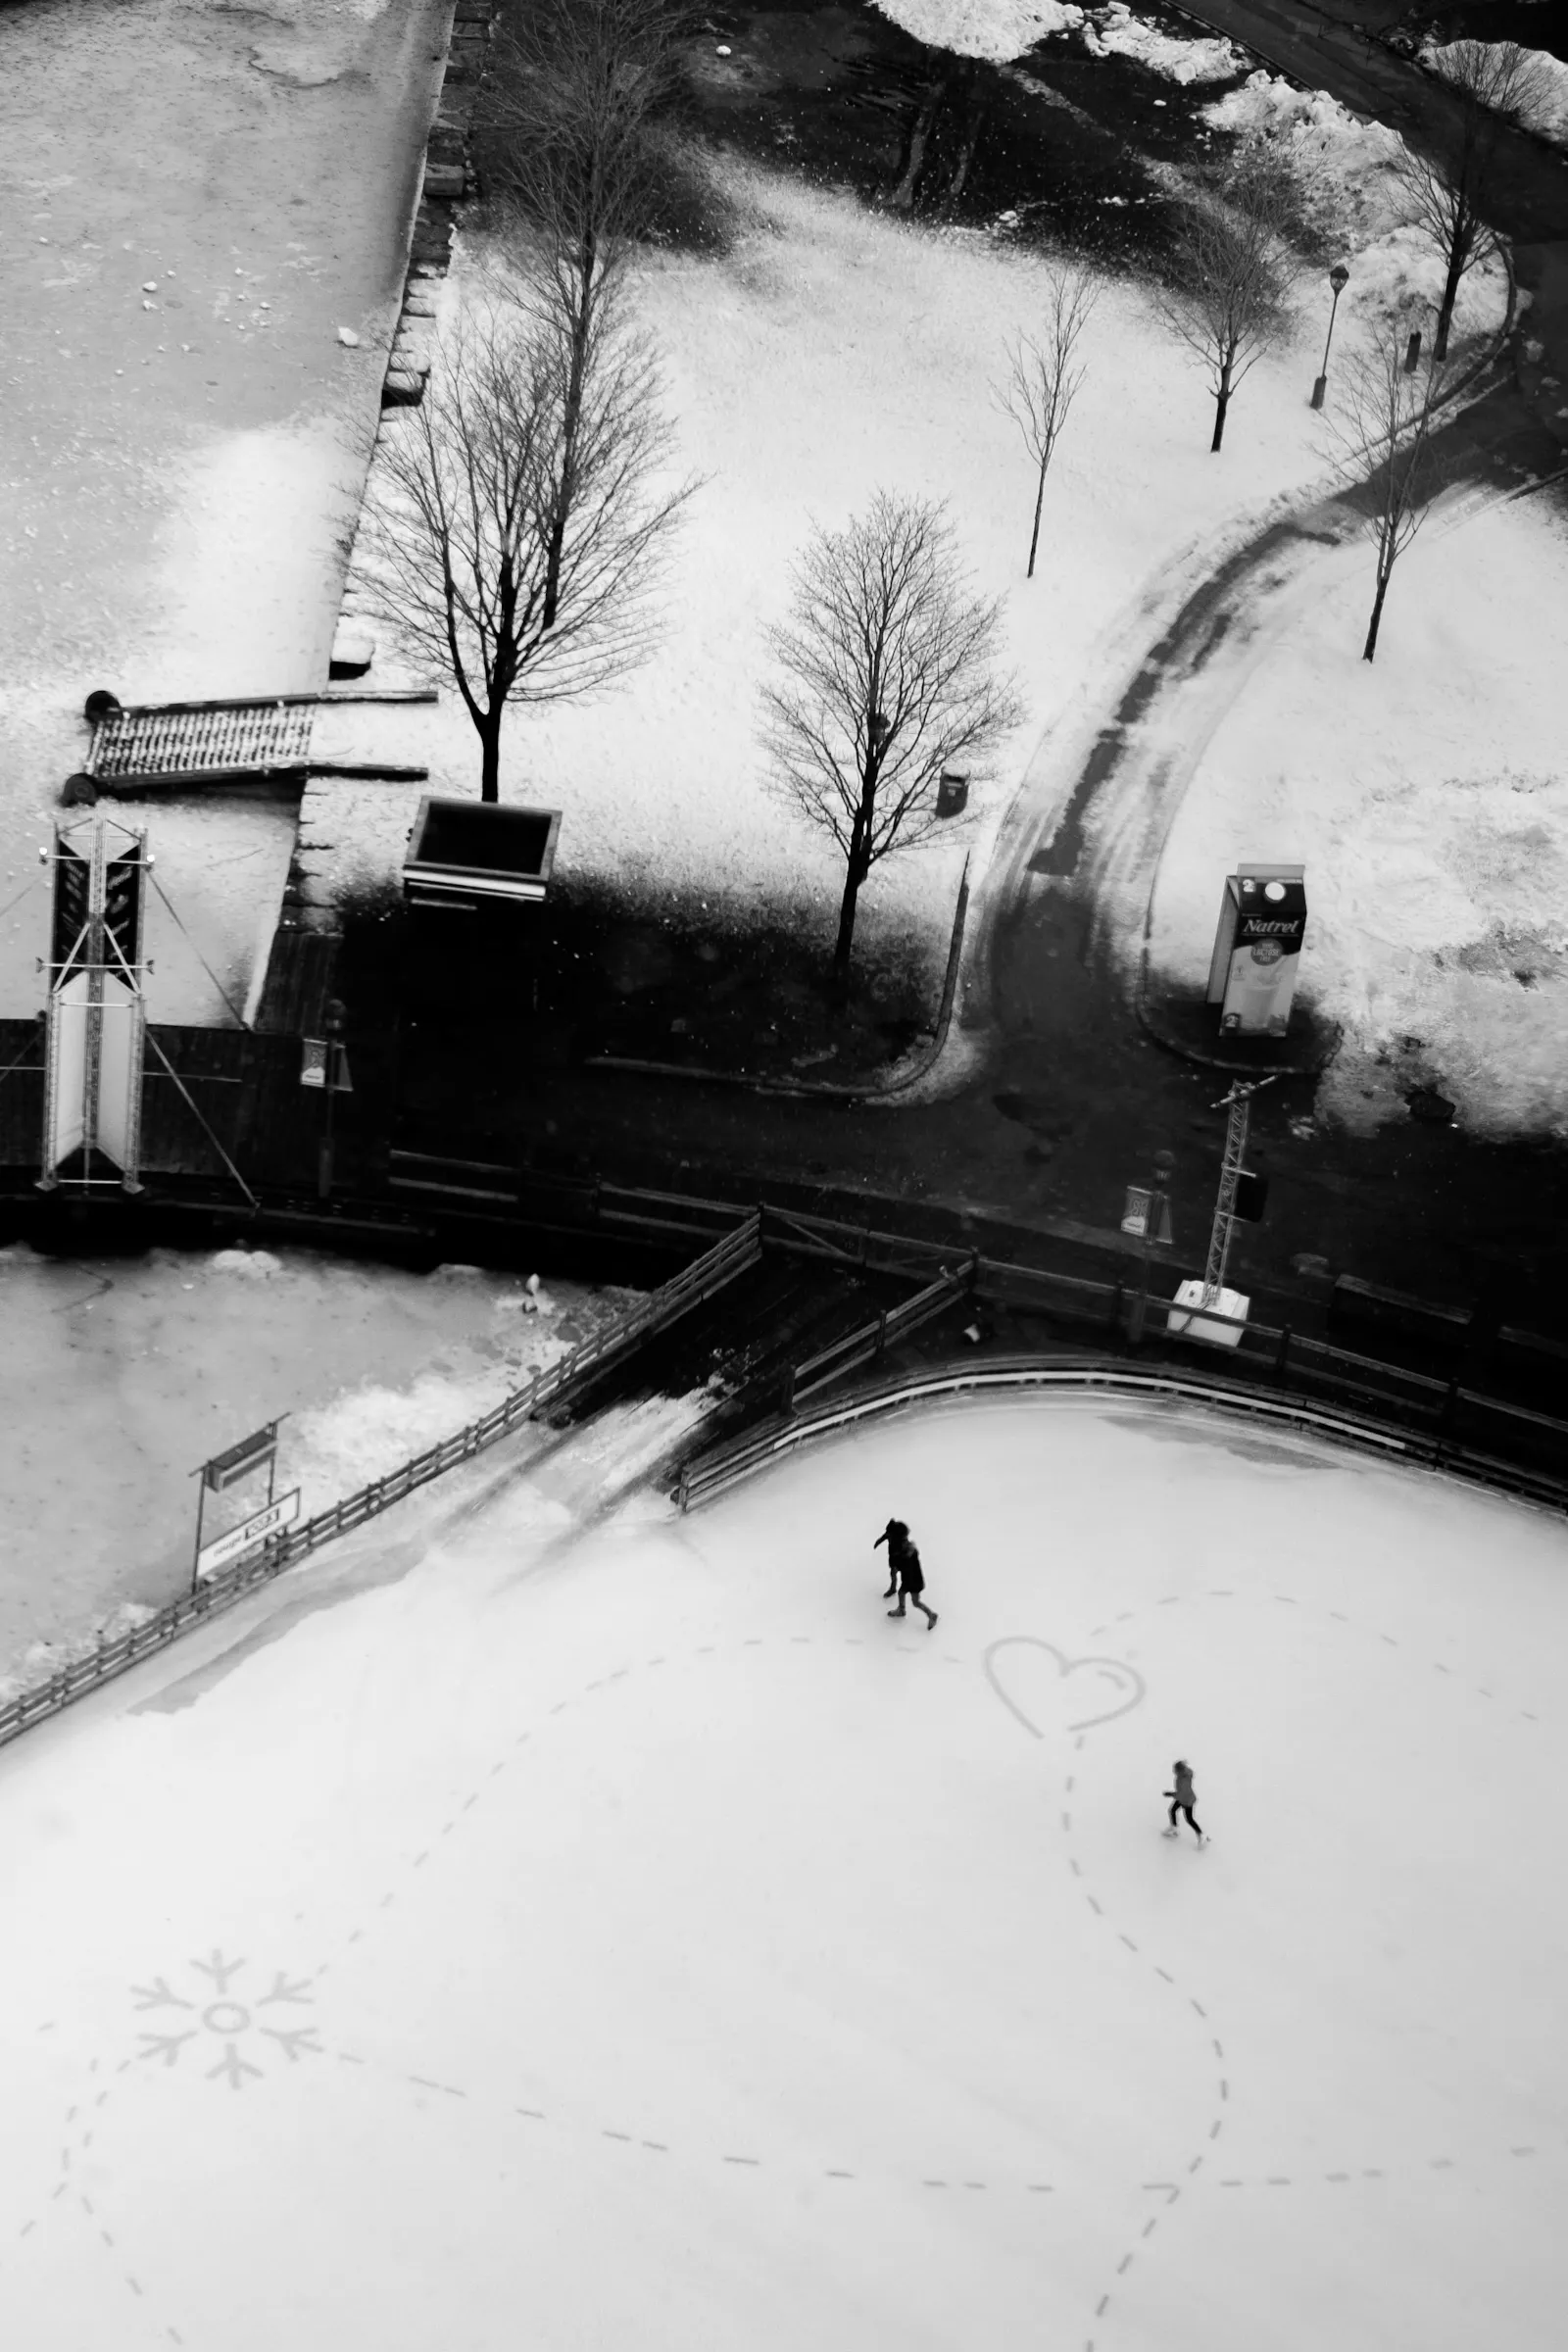 Seen from above, people skate on an ice rink